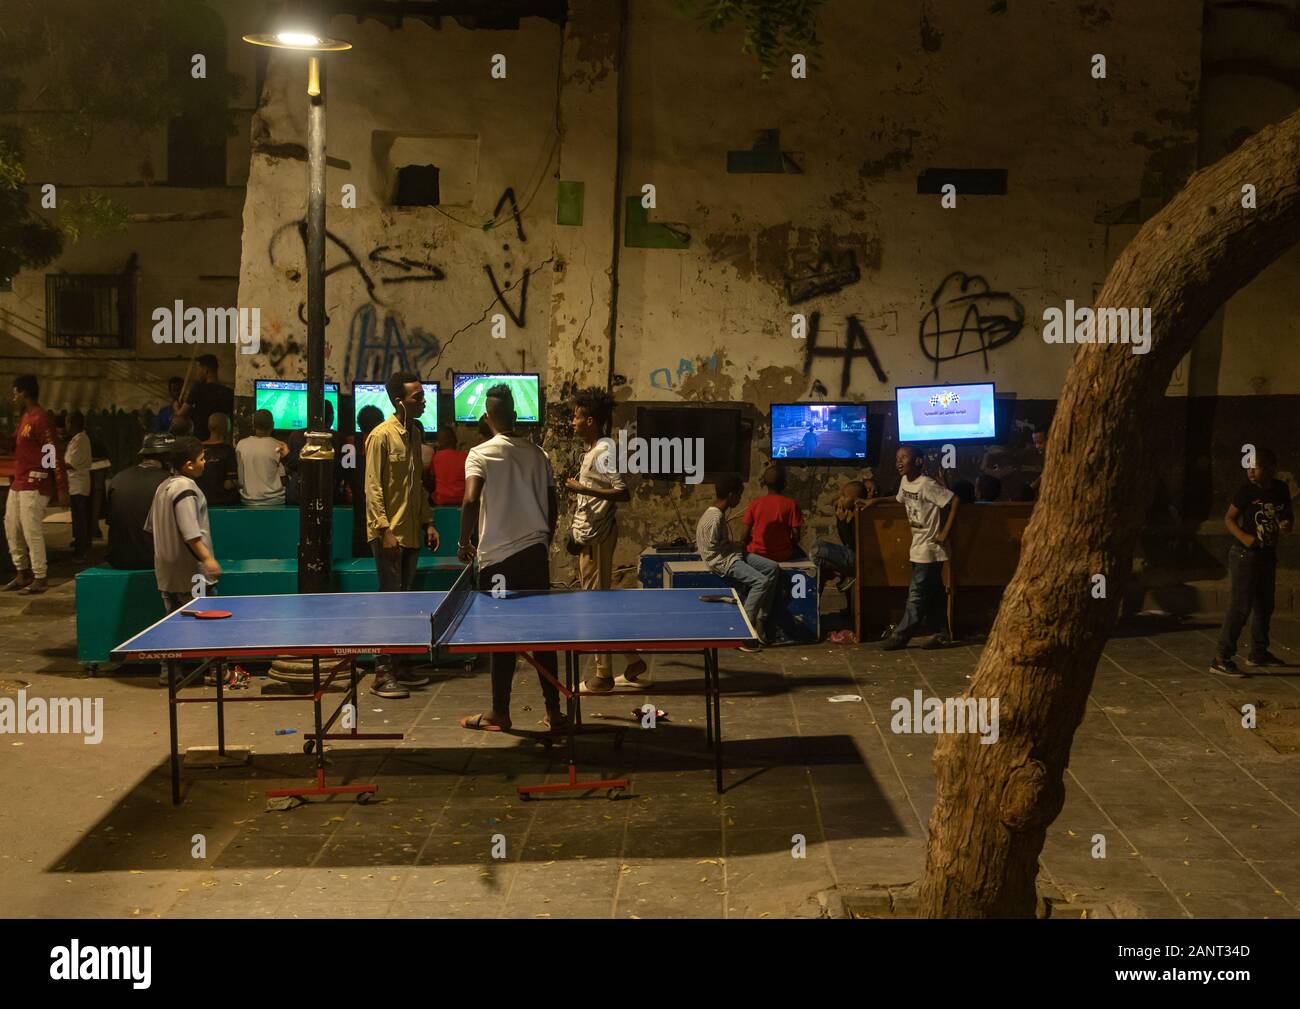 Somali refugees children playing video games in the street in al-Balad quater, Mecca province, Jeddah, Saudi Arabia Stock Photo